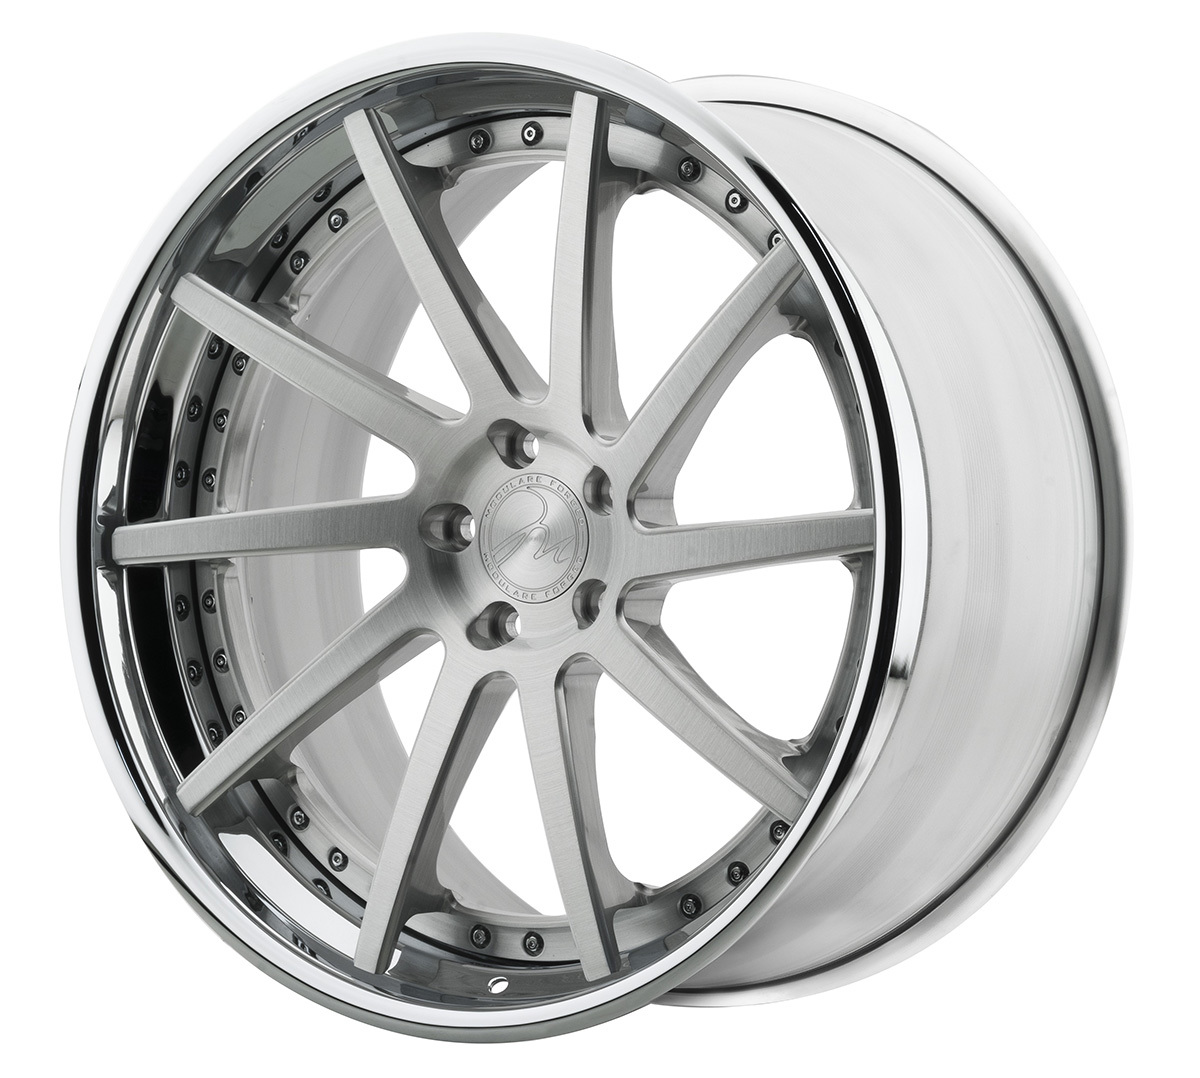 Modulare S9 forged wheels